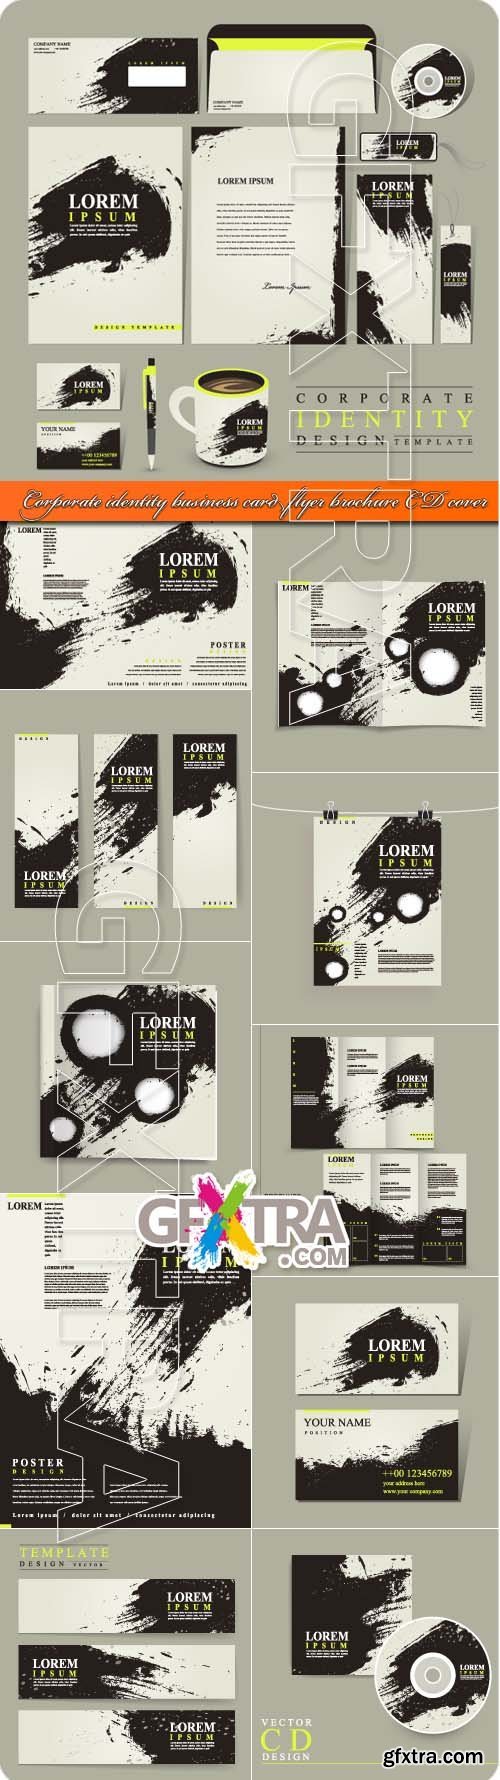 Corporate identity business card flyer brochure CD cover poster banner booklet grunge style vector